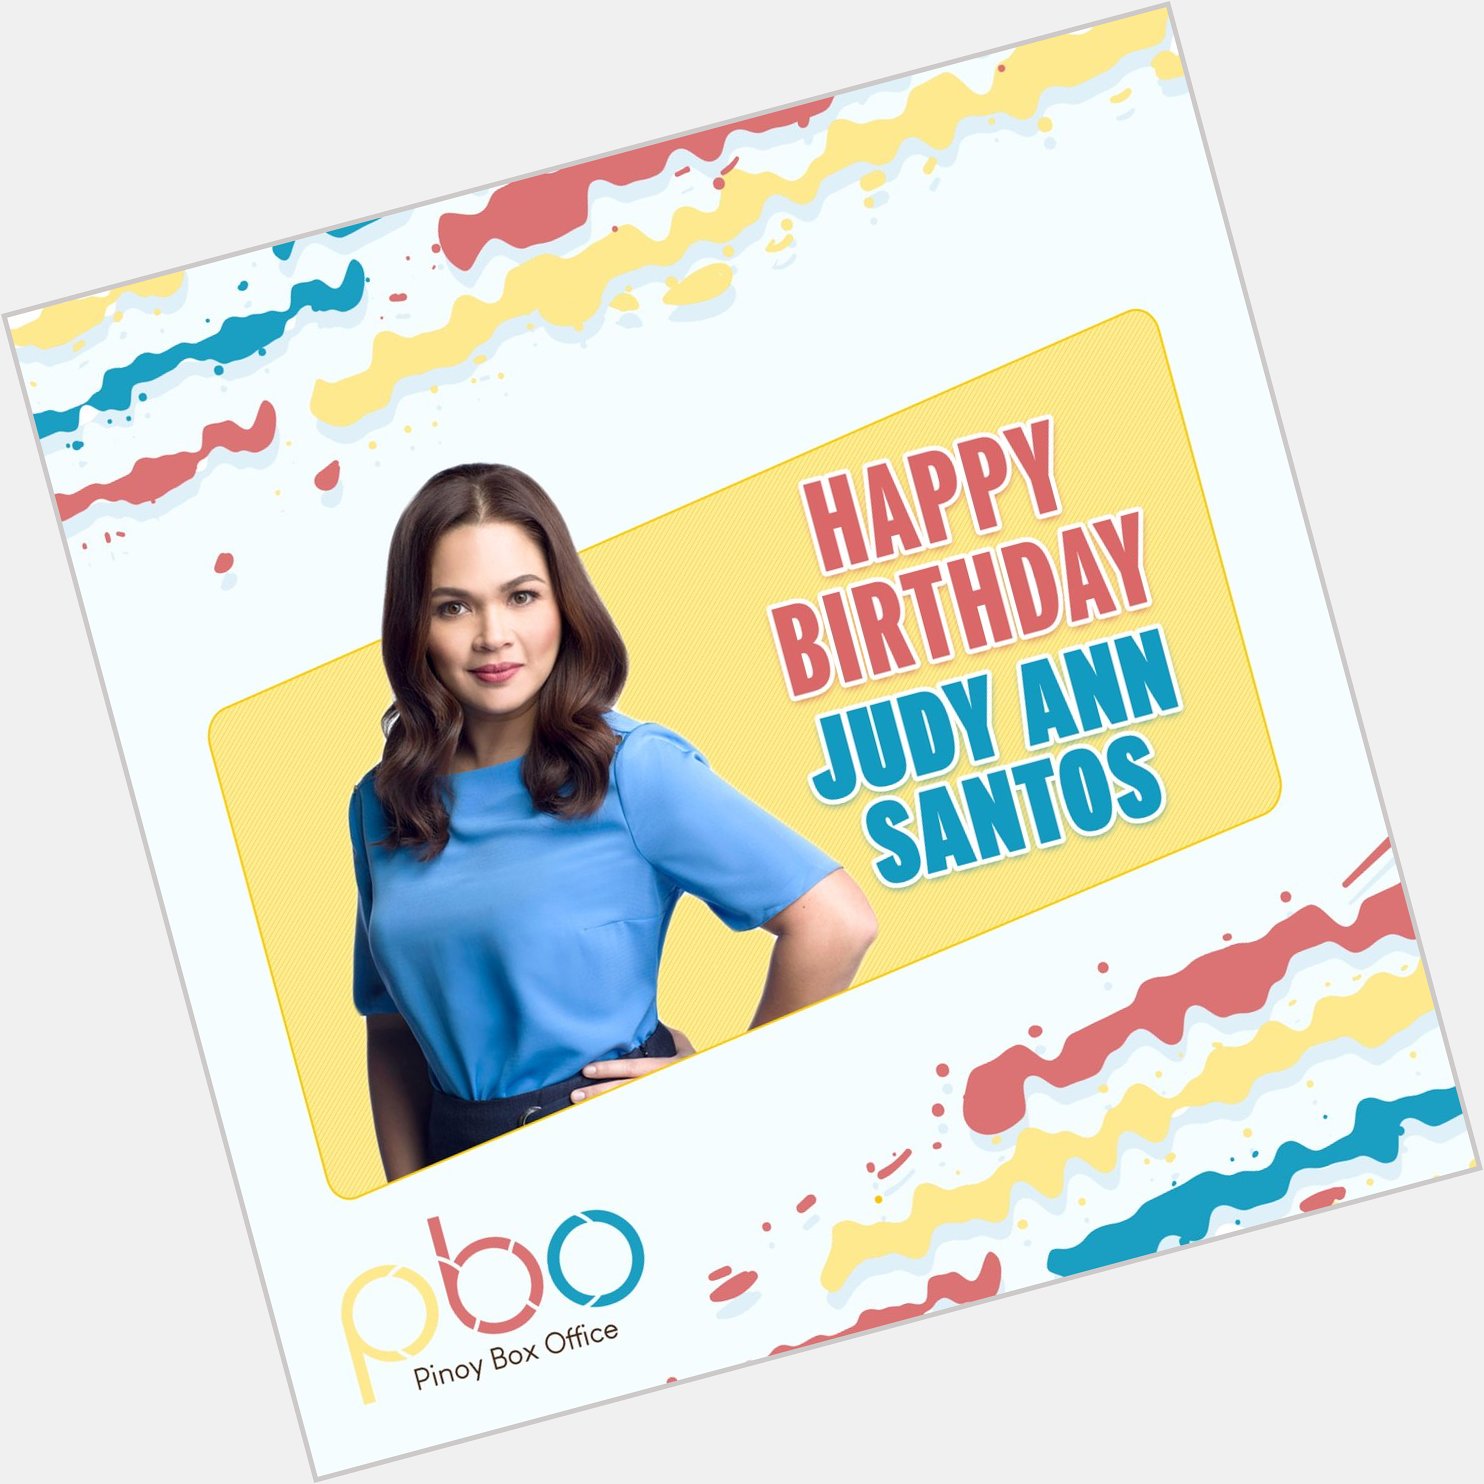 Happy birthday, Judy Ann Santos- Agoncillo! Wishing you a day filled with happiness and love! 